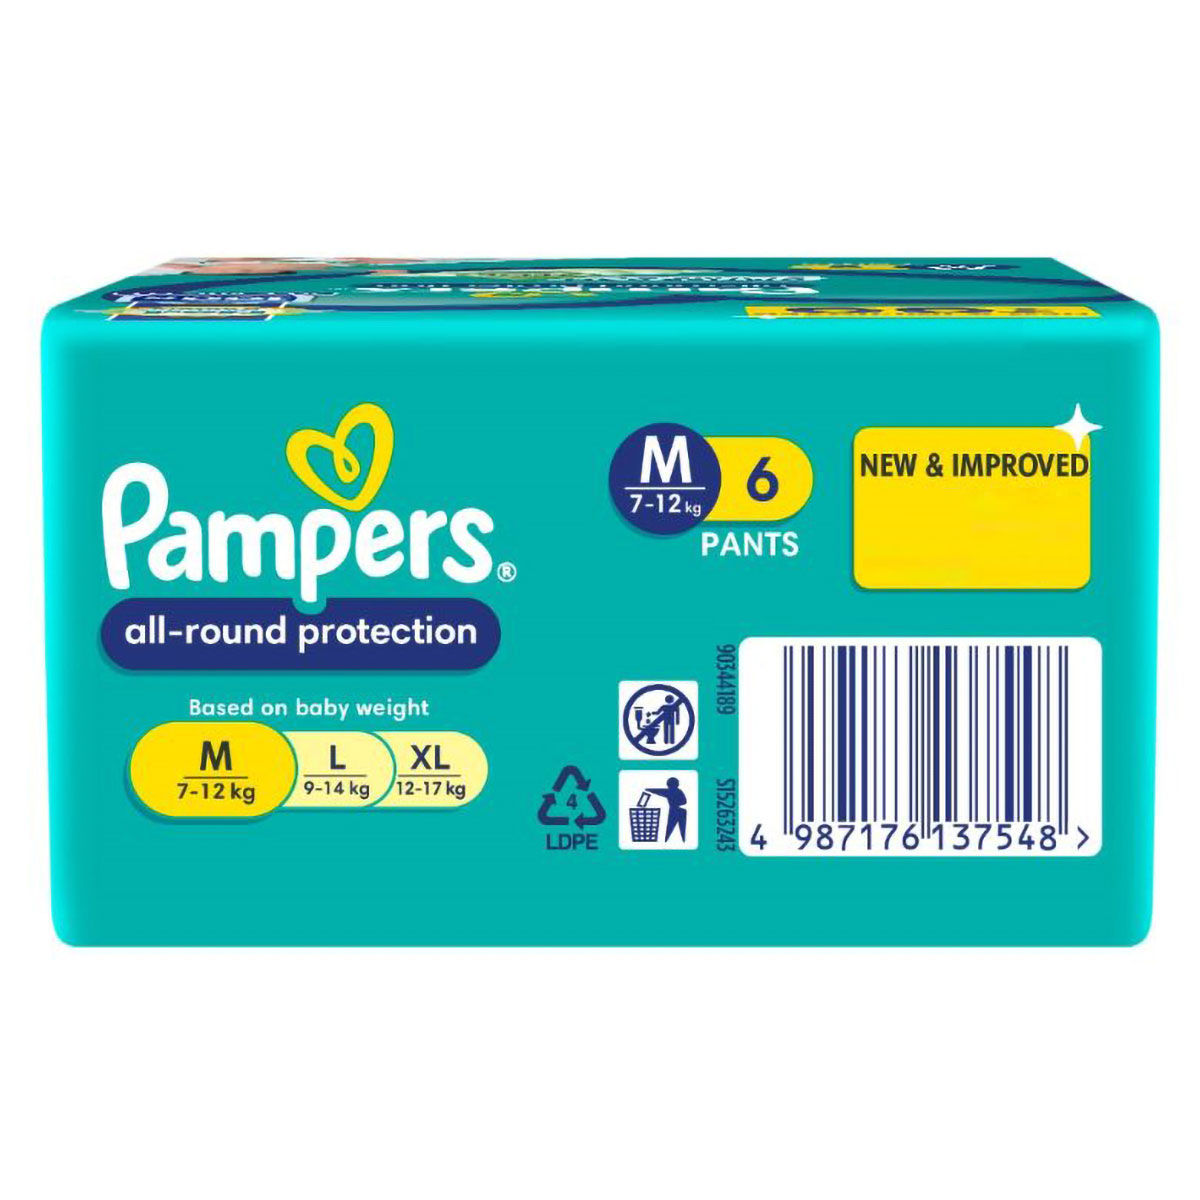 Buy Pampers All round Protection Pants, Medium size baby diapers (MD) 152  Count, Anti Rash diapers, Lotion with Aloe Vera & Pampers Taped Baby Diapers,  Medium, (MD), 66 count Online at Low